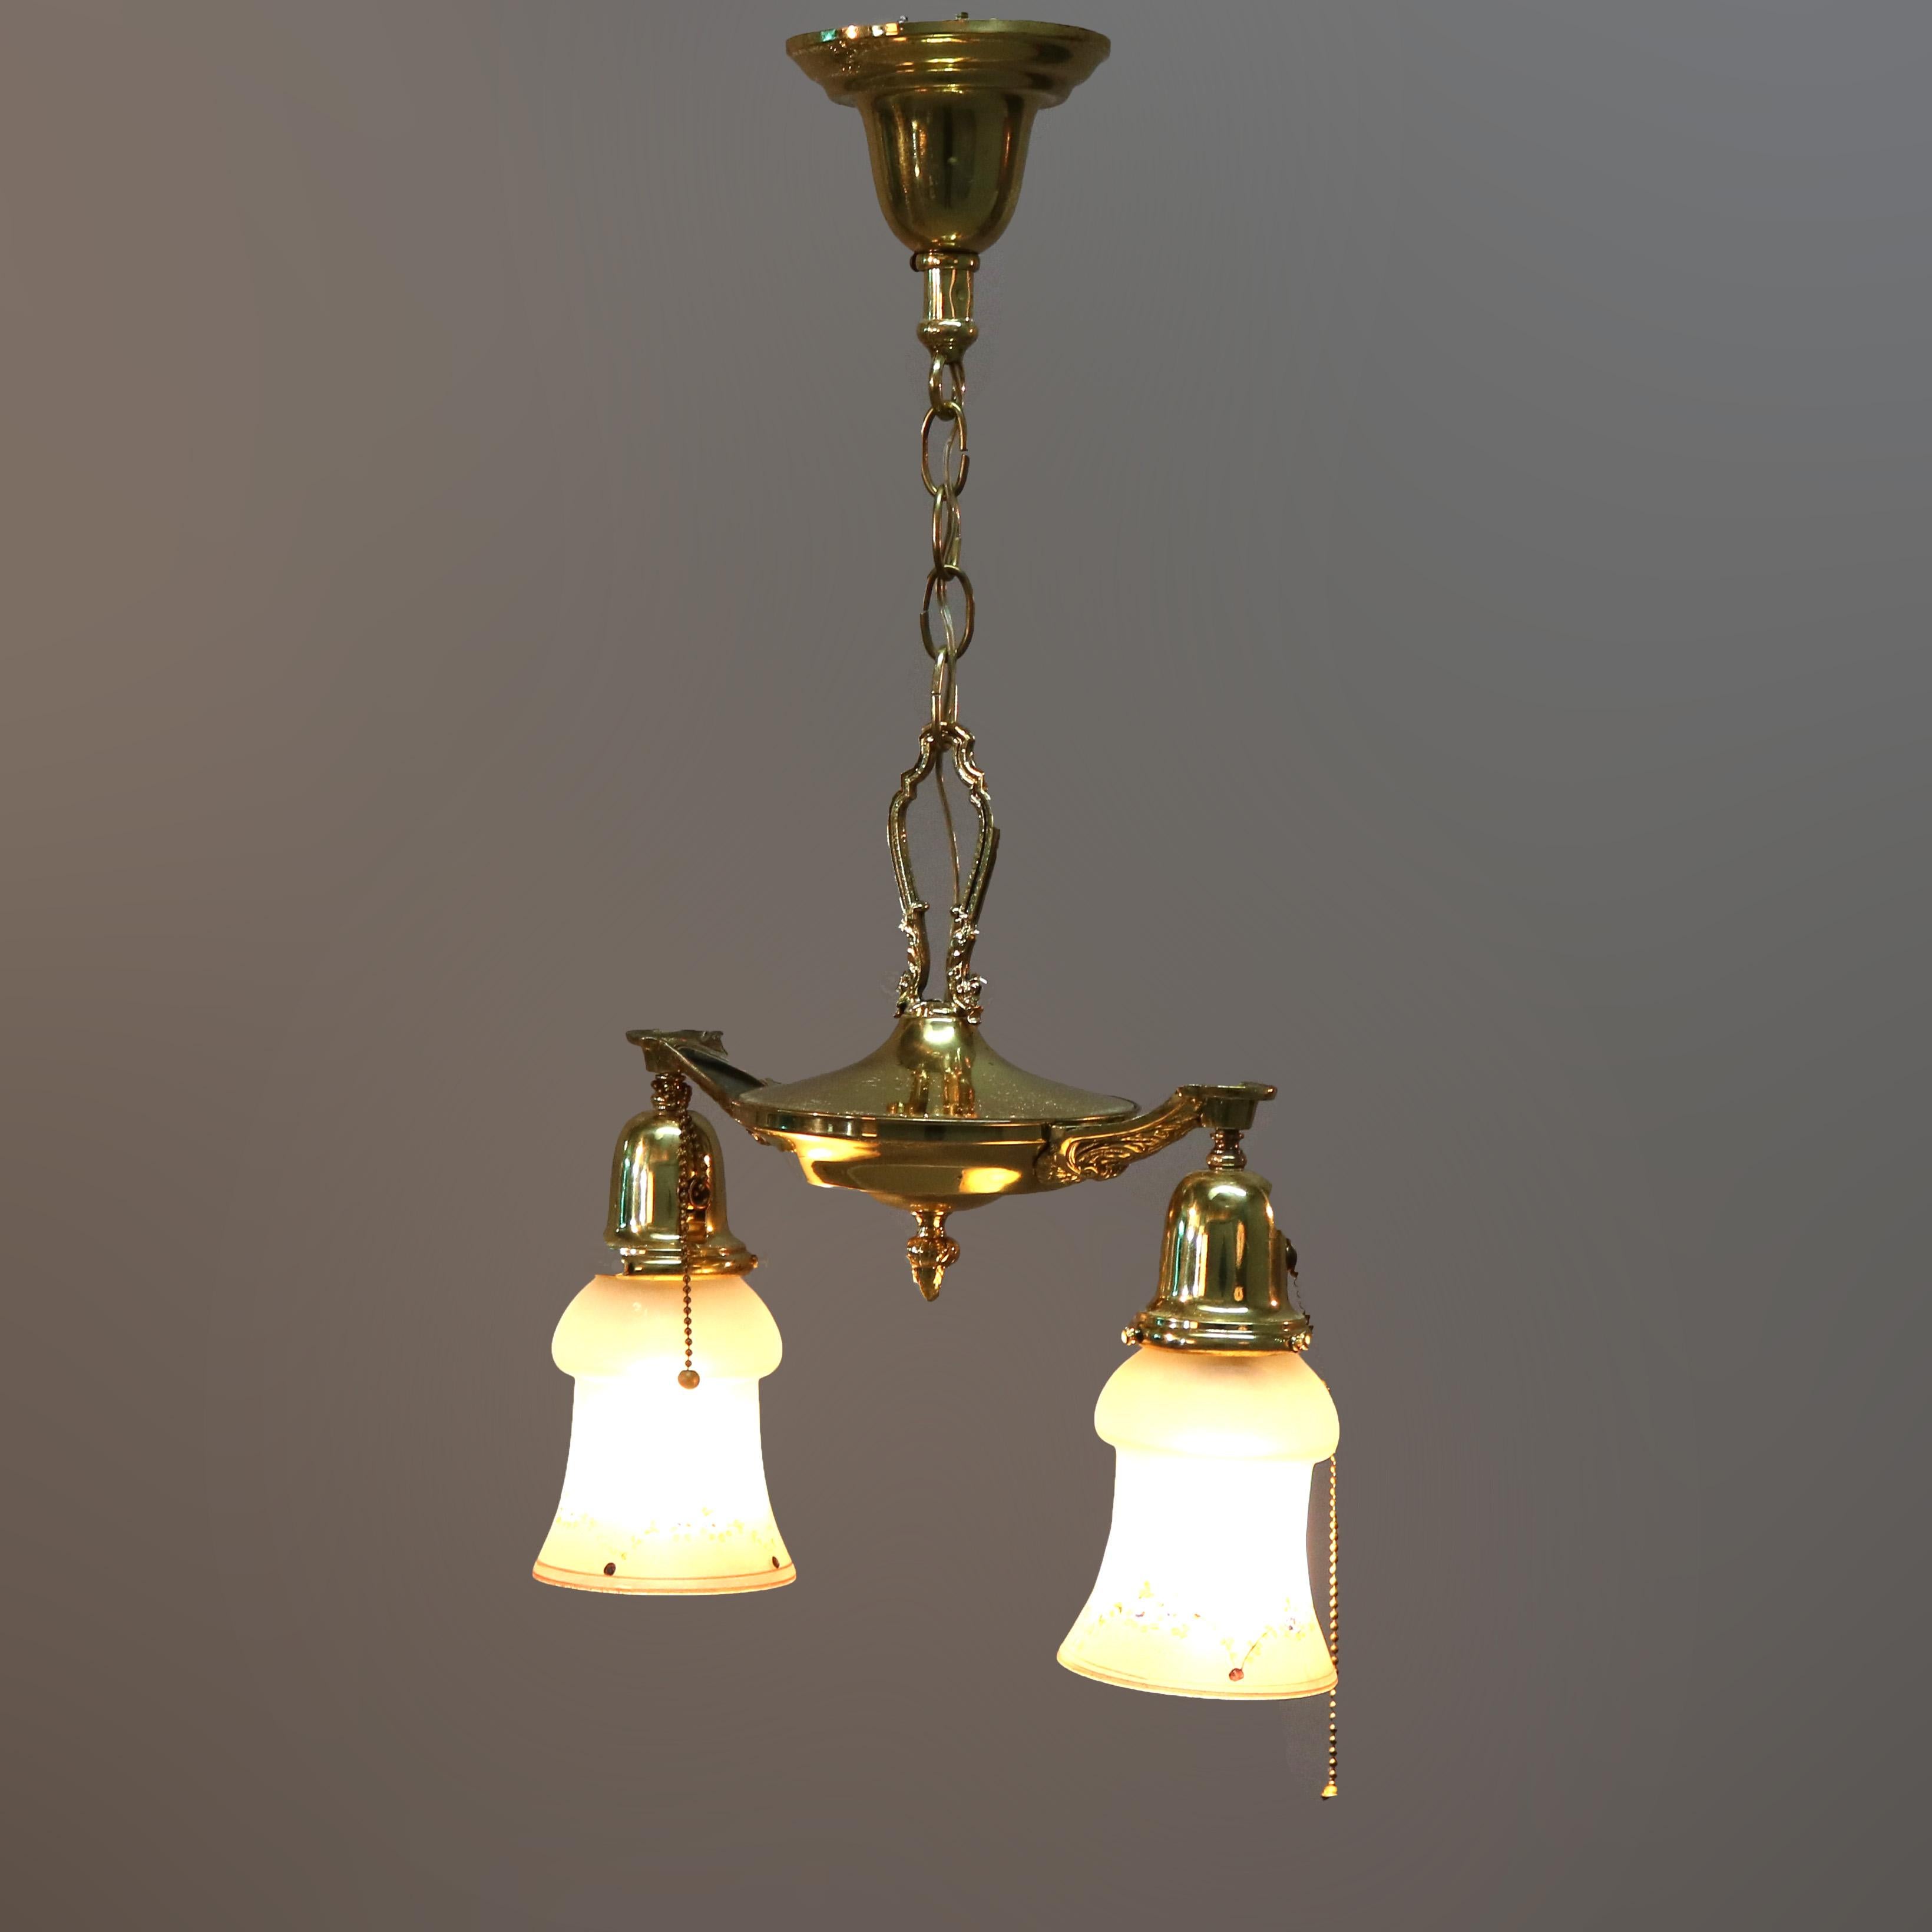 Cast Antique Brass Two Drop-Light Hanging Ceiling Fixture, Circa 1920 For Sale